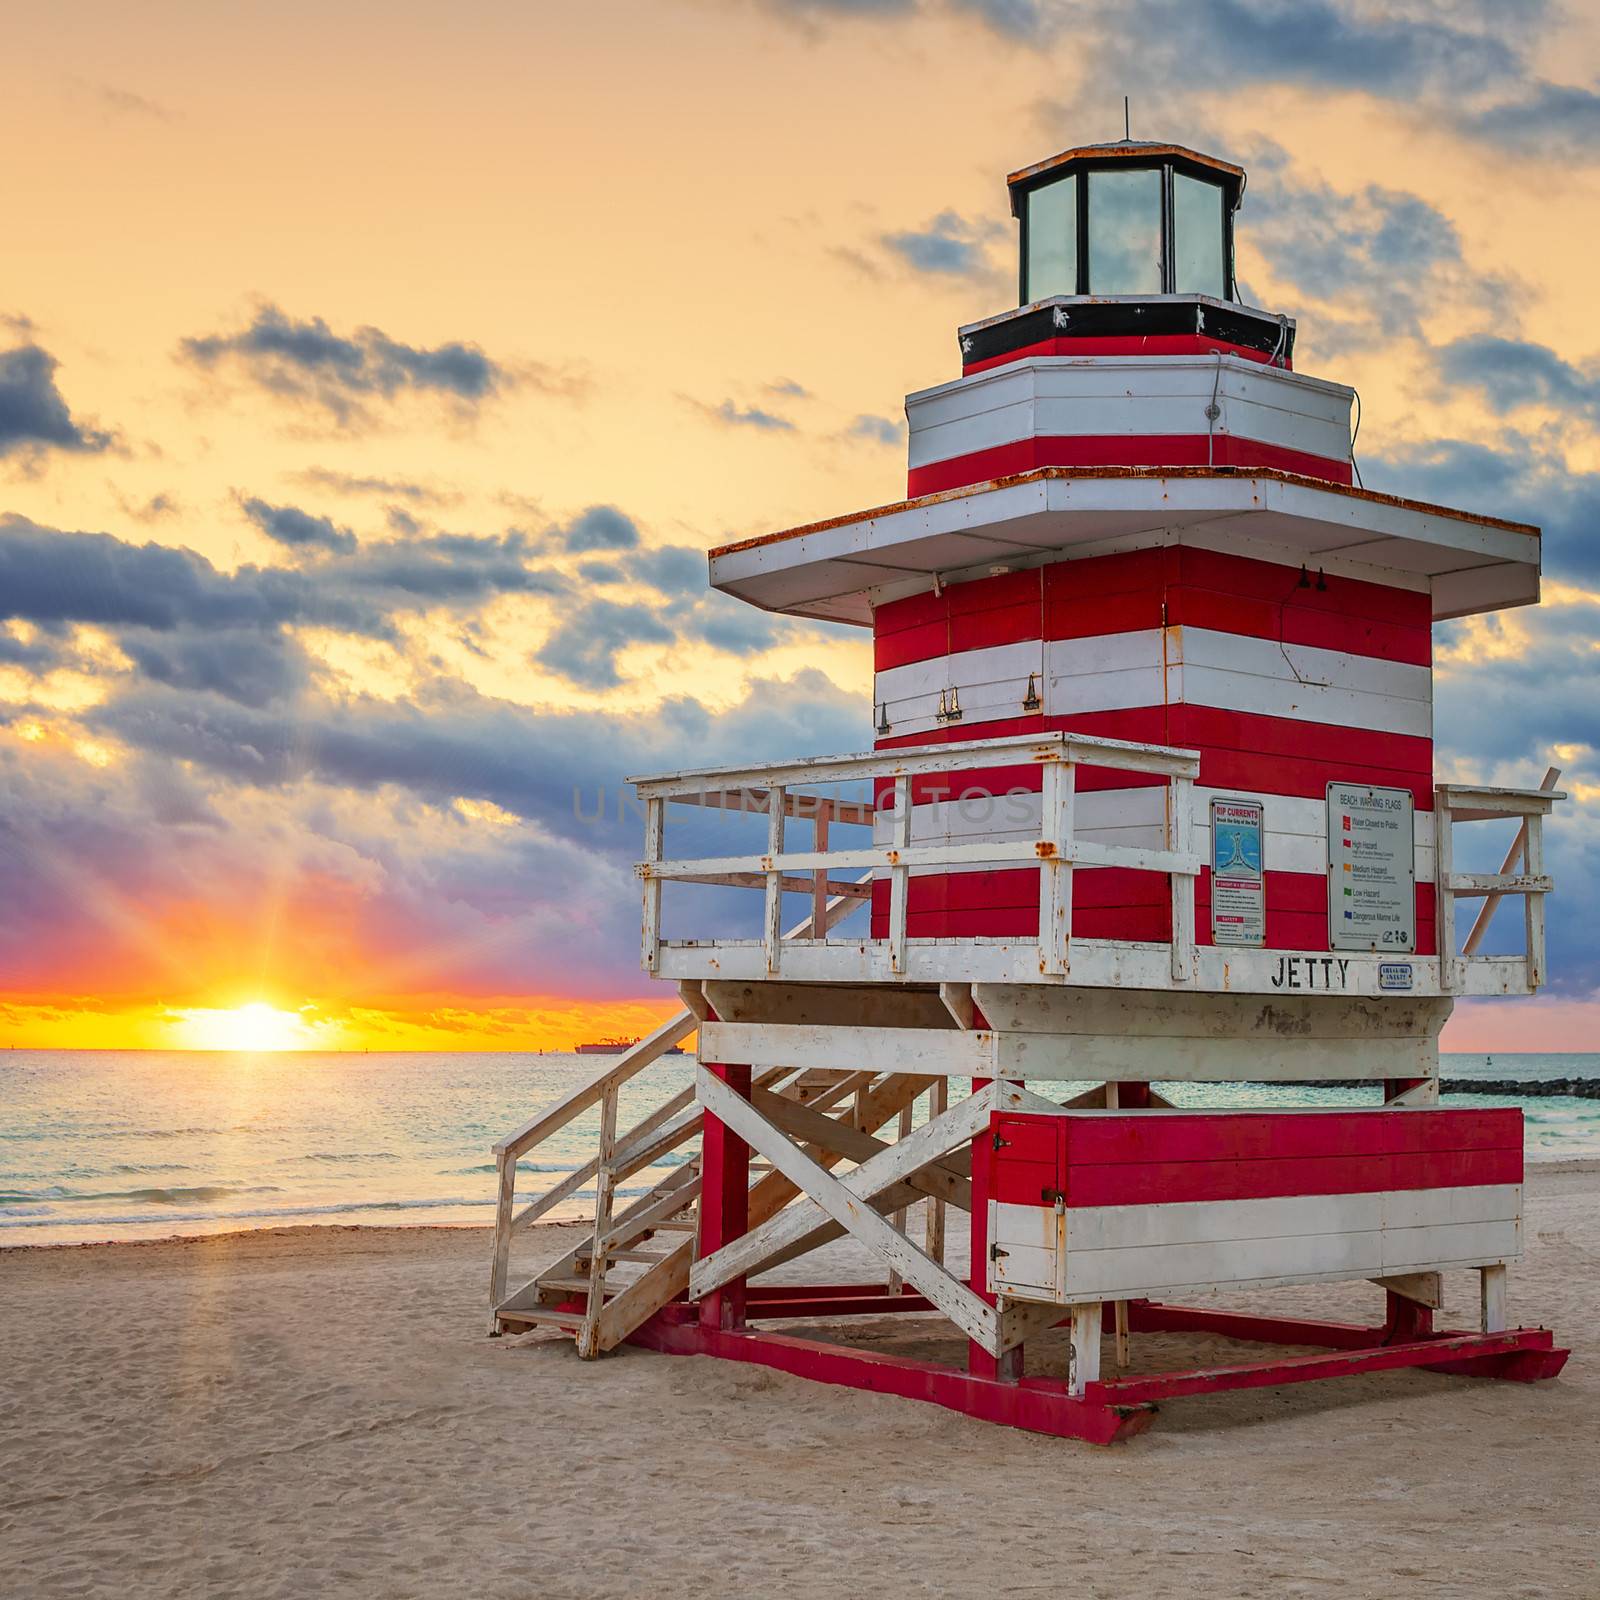 Miami South Beach sunrise with famous lifeguard tower